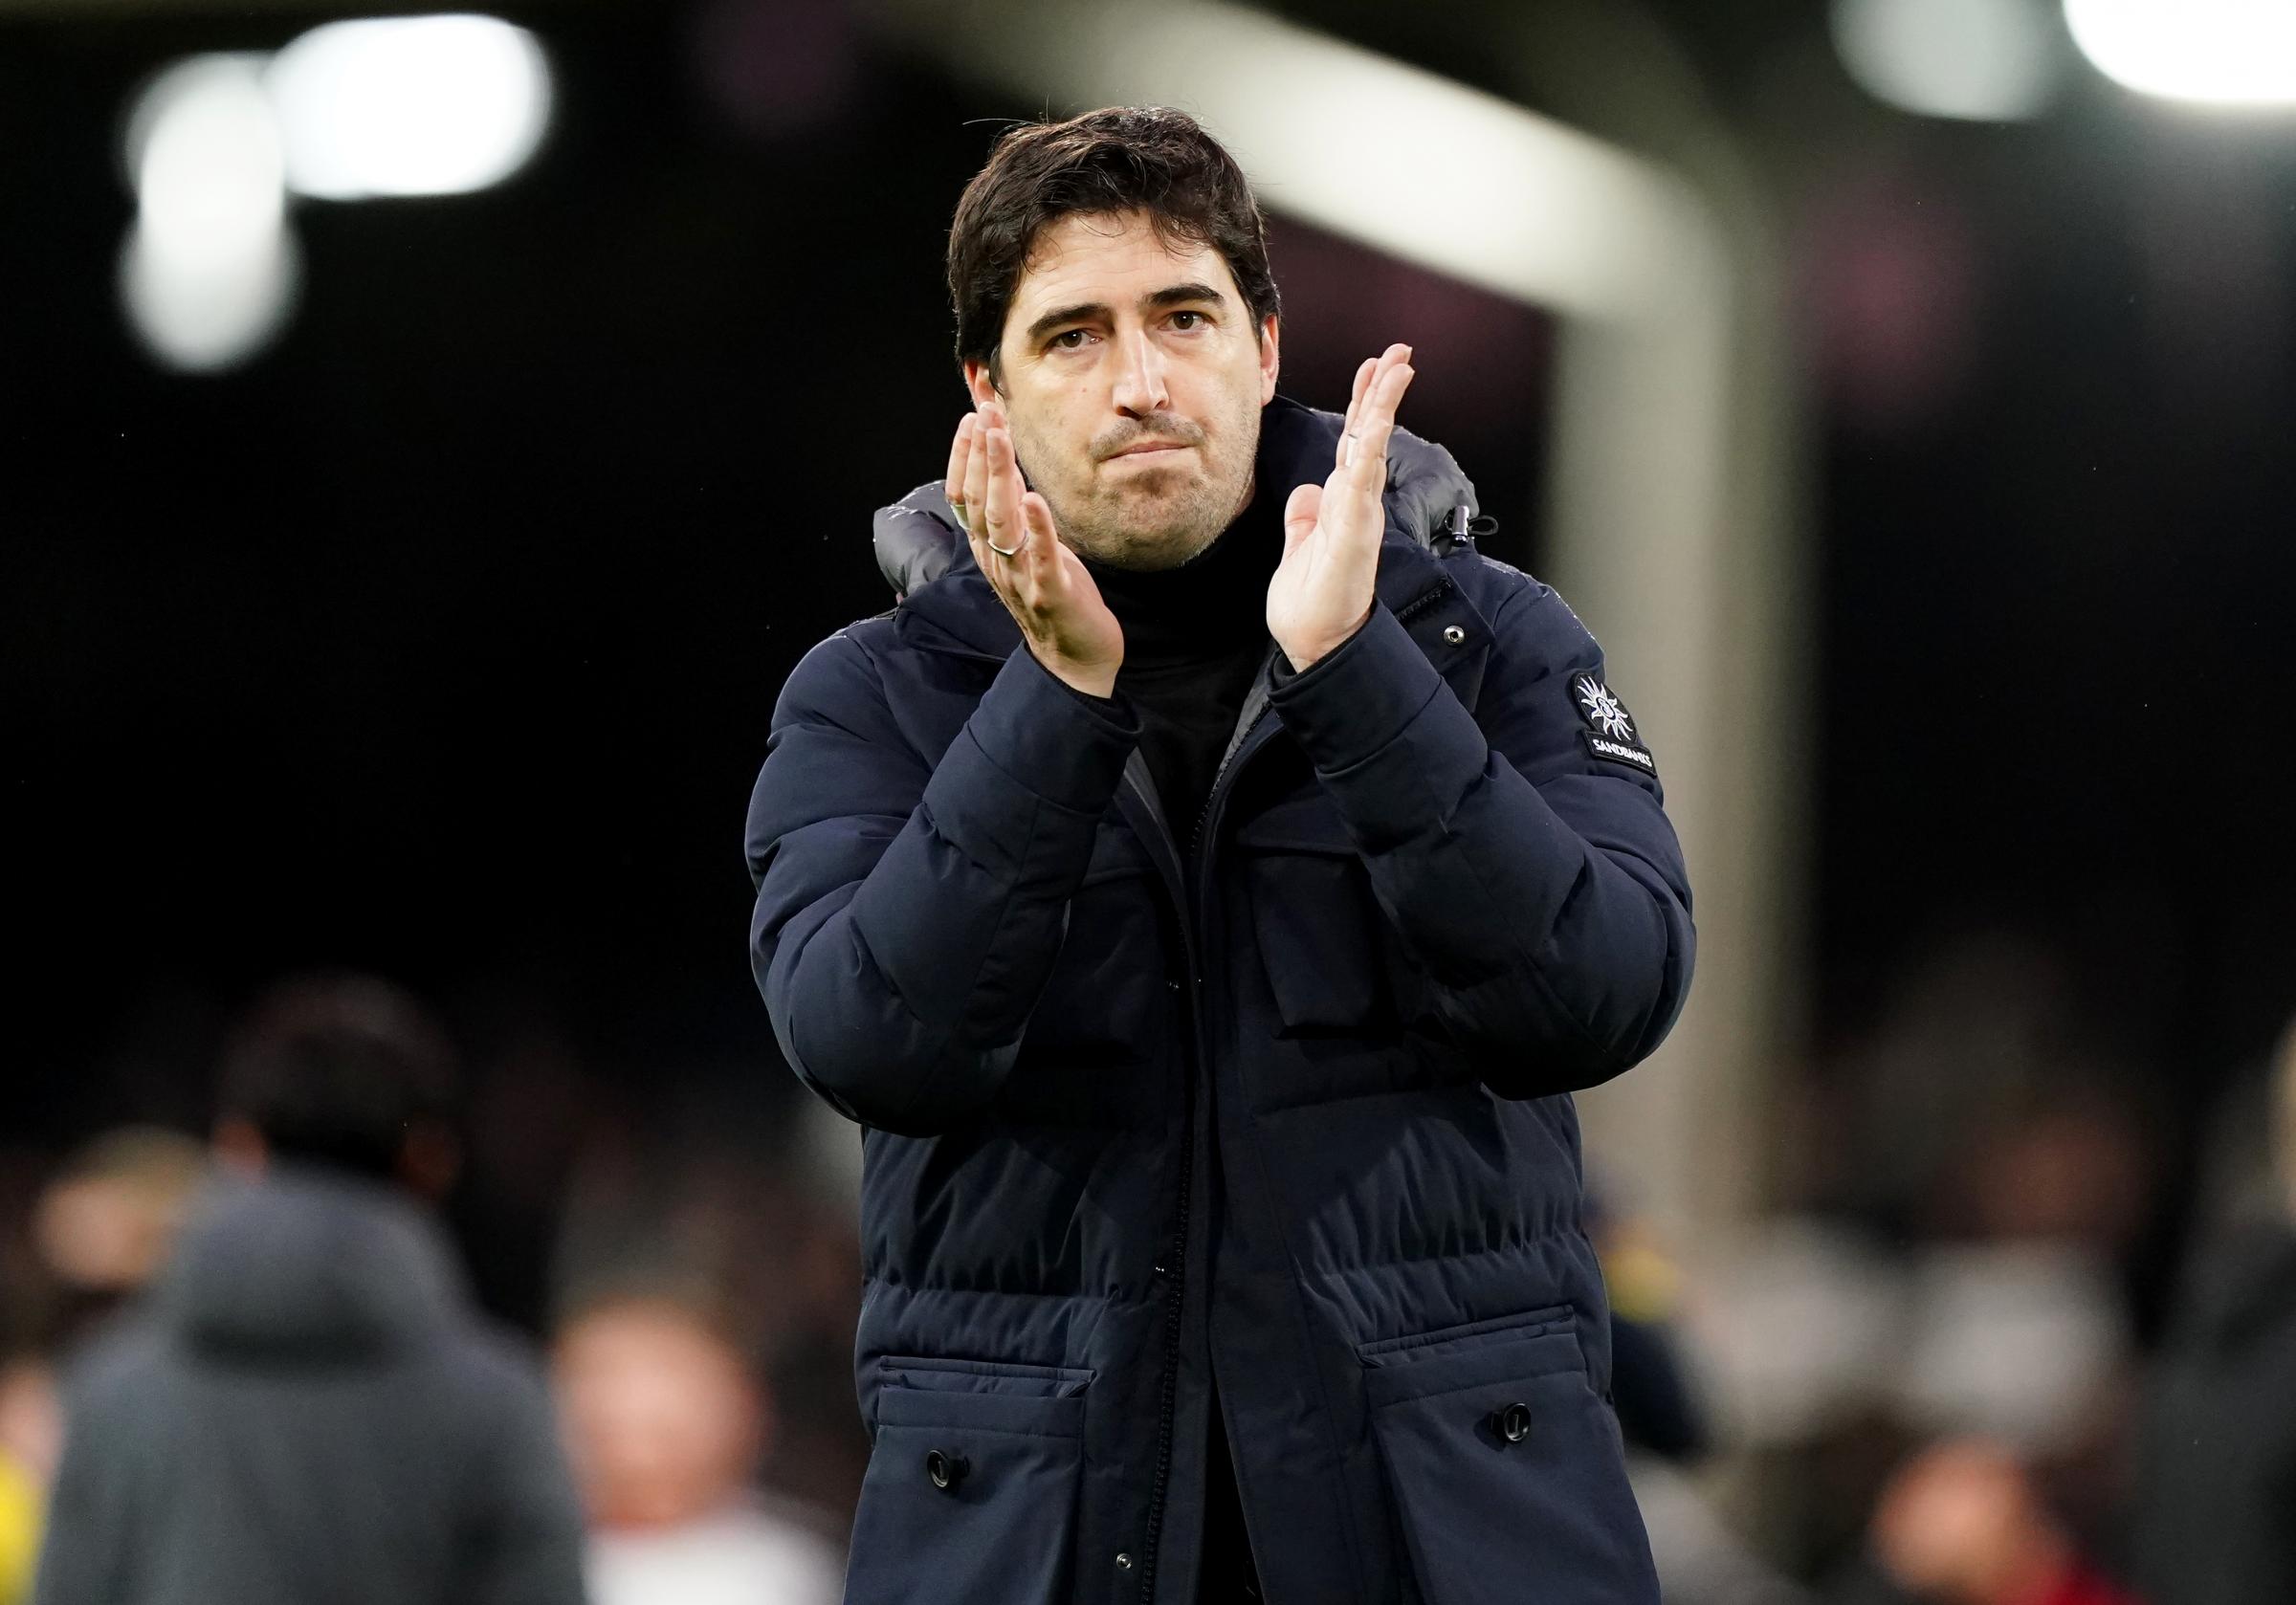 AFC Bournemouth's Andoni Iraola on second half of Fulham defeat